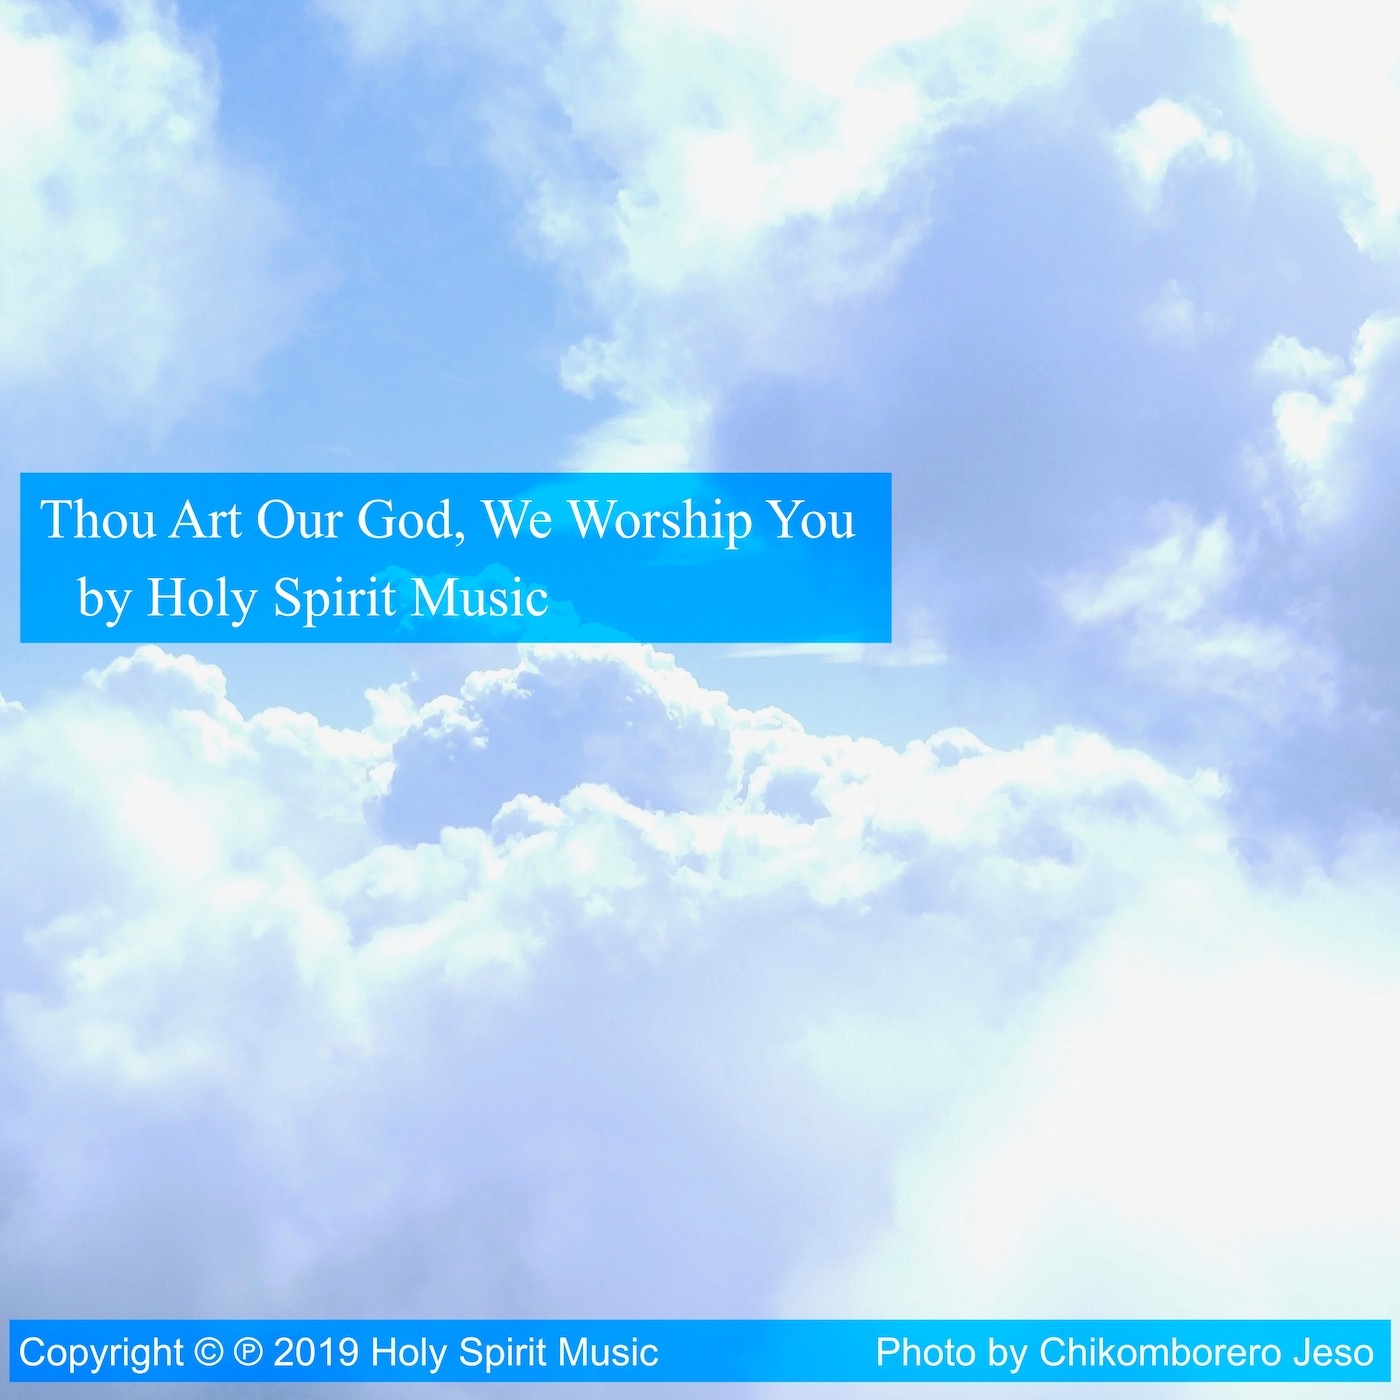 Holy Spirit Music - Thou Art Our God, We Worship You - Music Cover Art